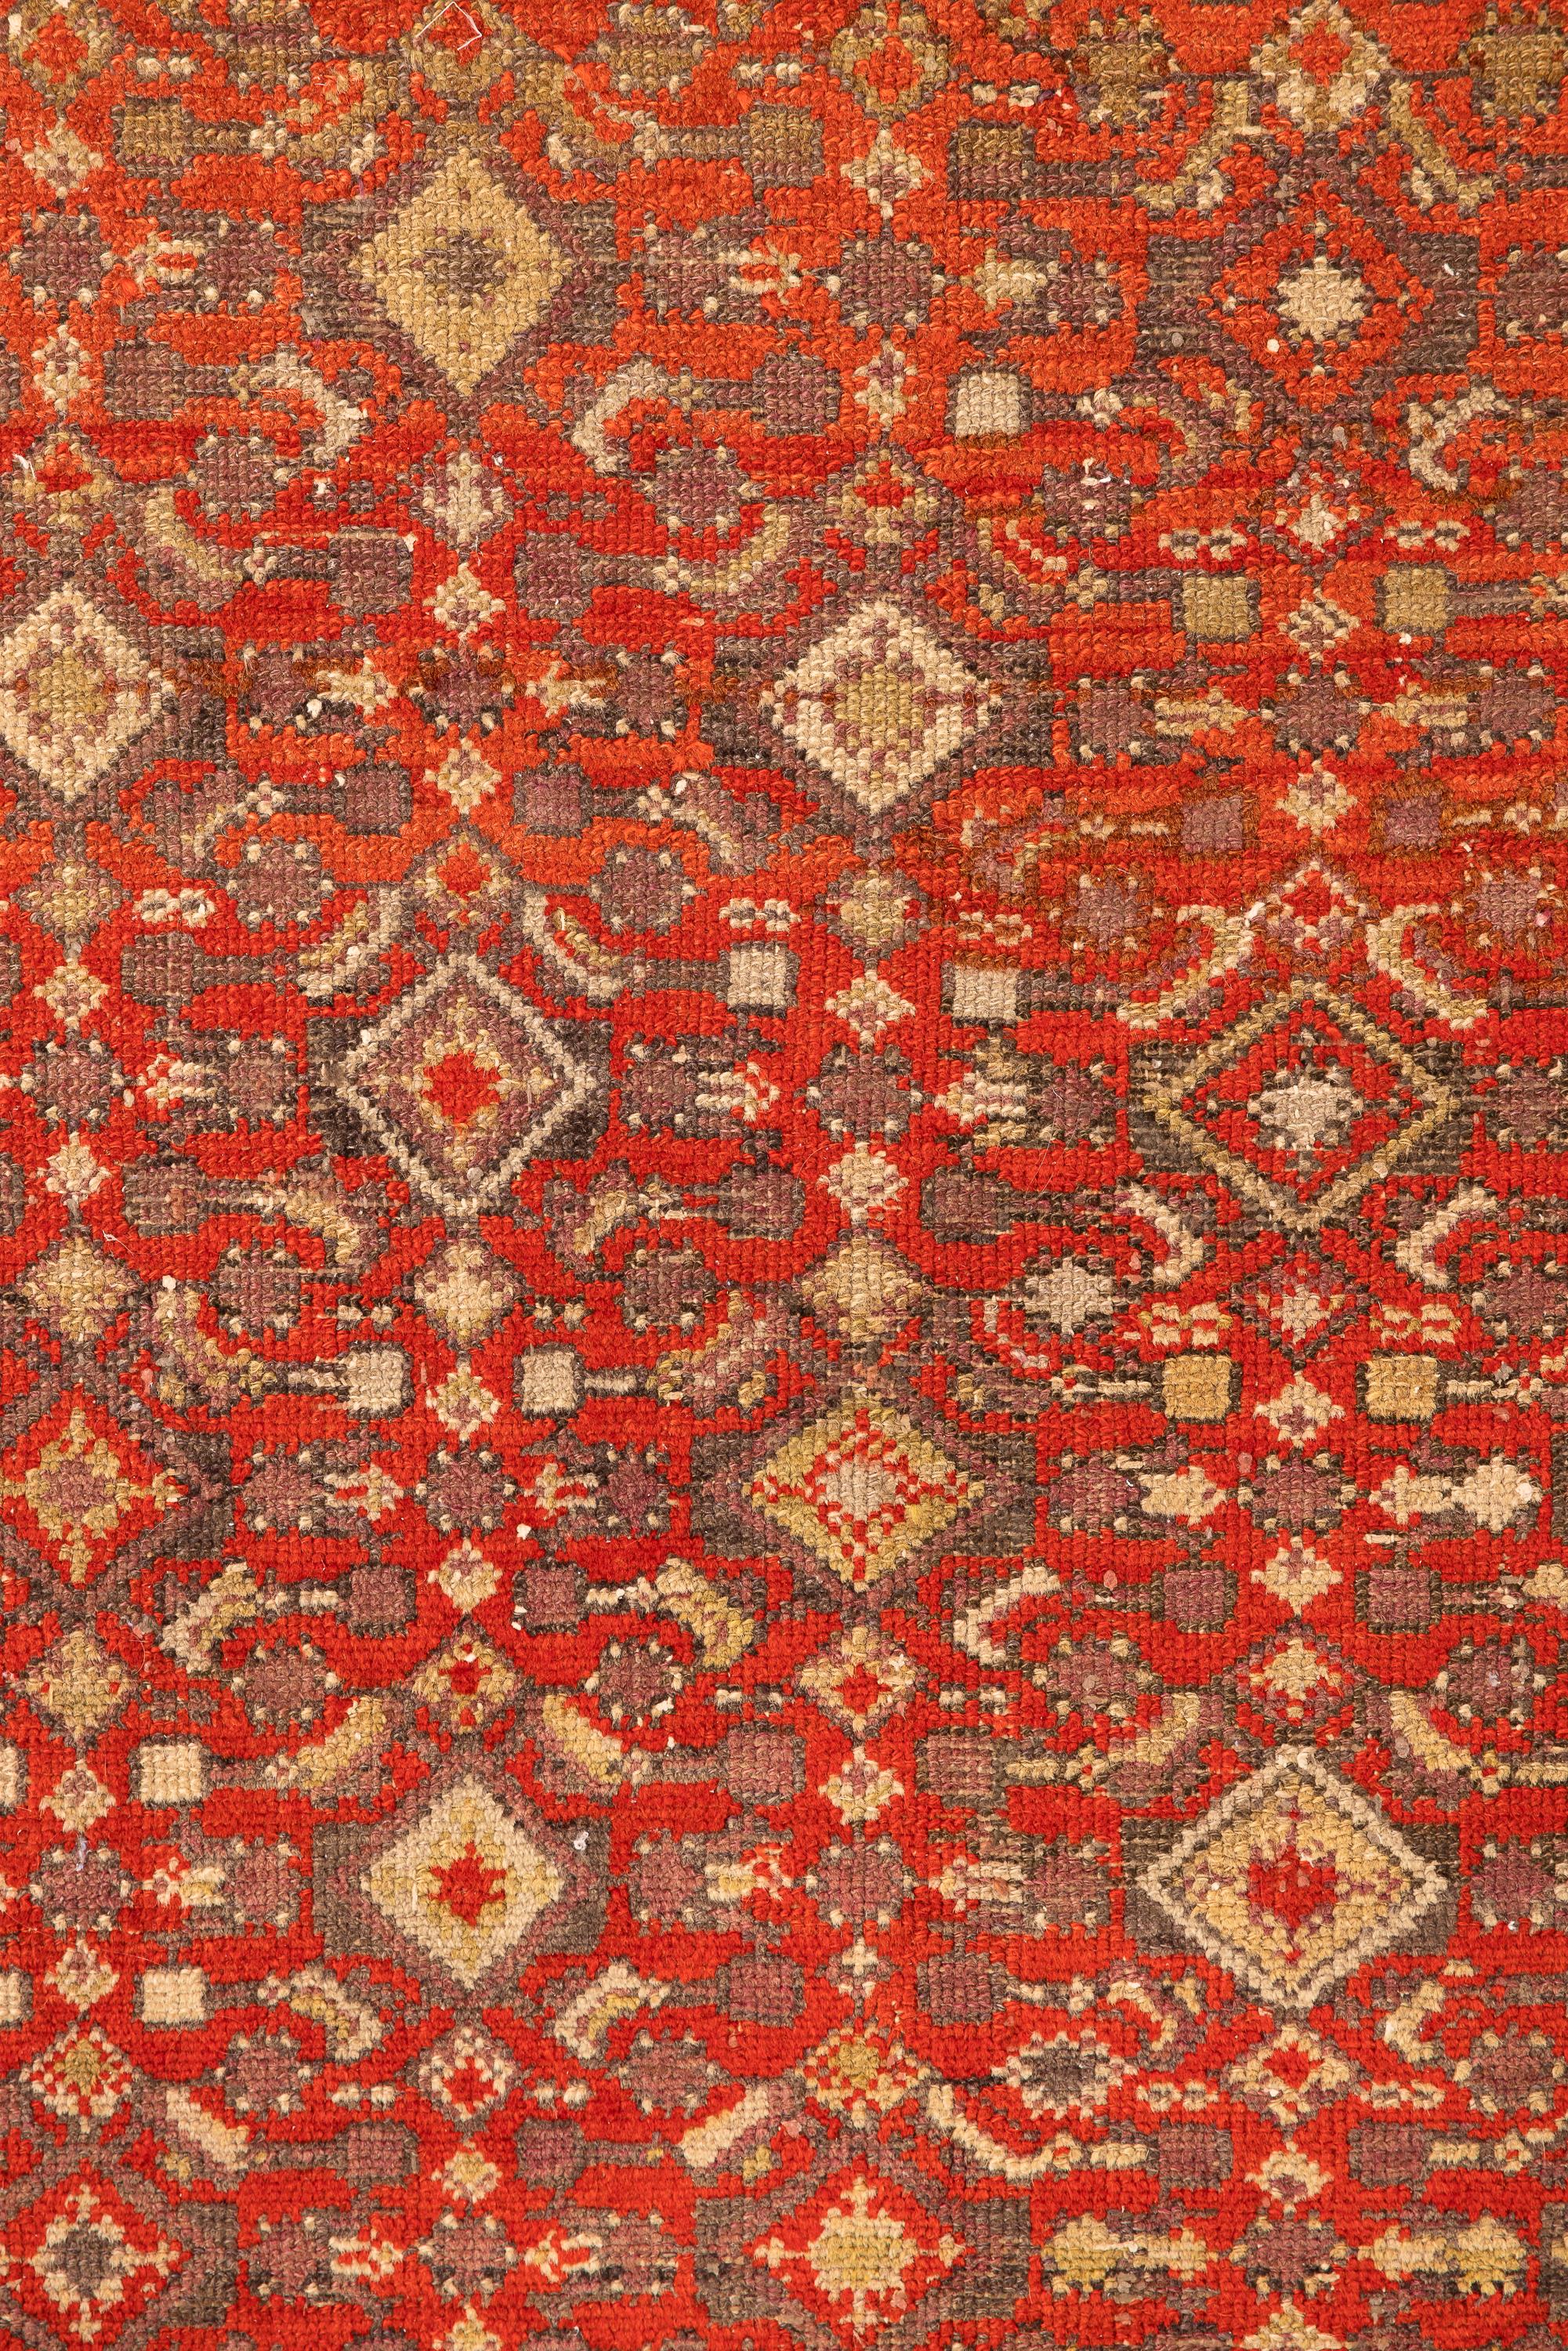 Malayer – Northwest Persia

This Malayer was made with lustrous and resistant wool and features subtle, mesmerizing, and repeating geometric patterns. The main field, in red, is composed of small diamonds surrounded by the most varied geometric